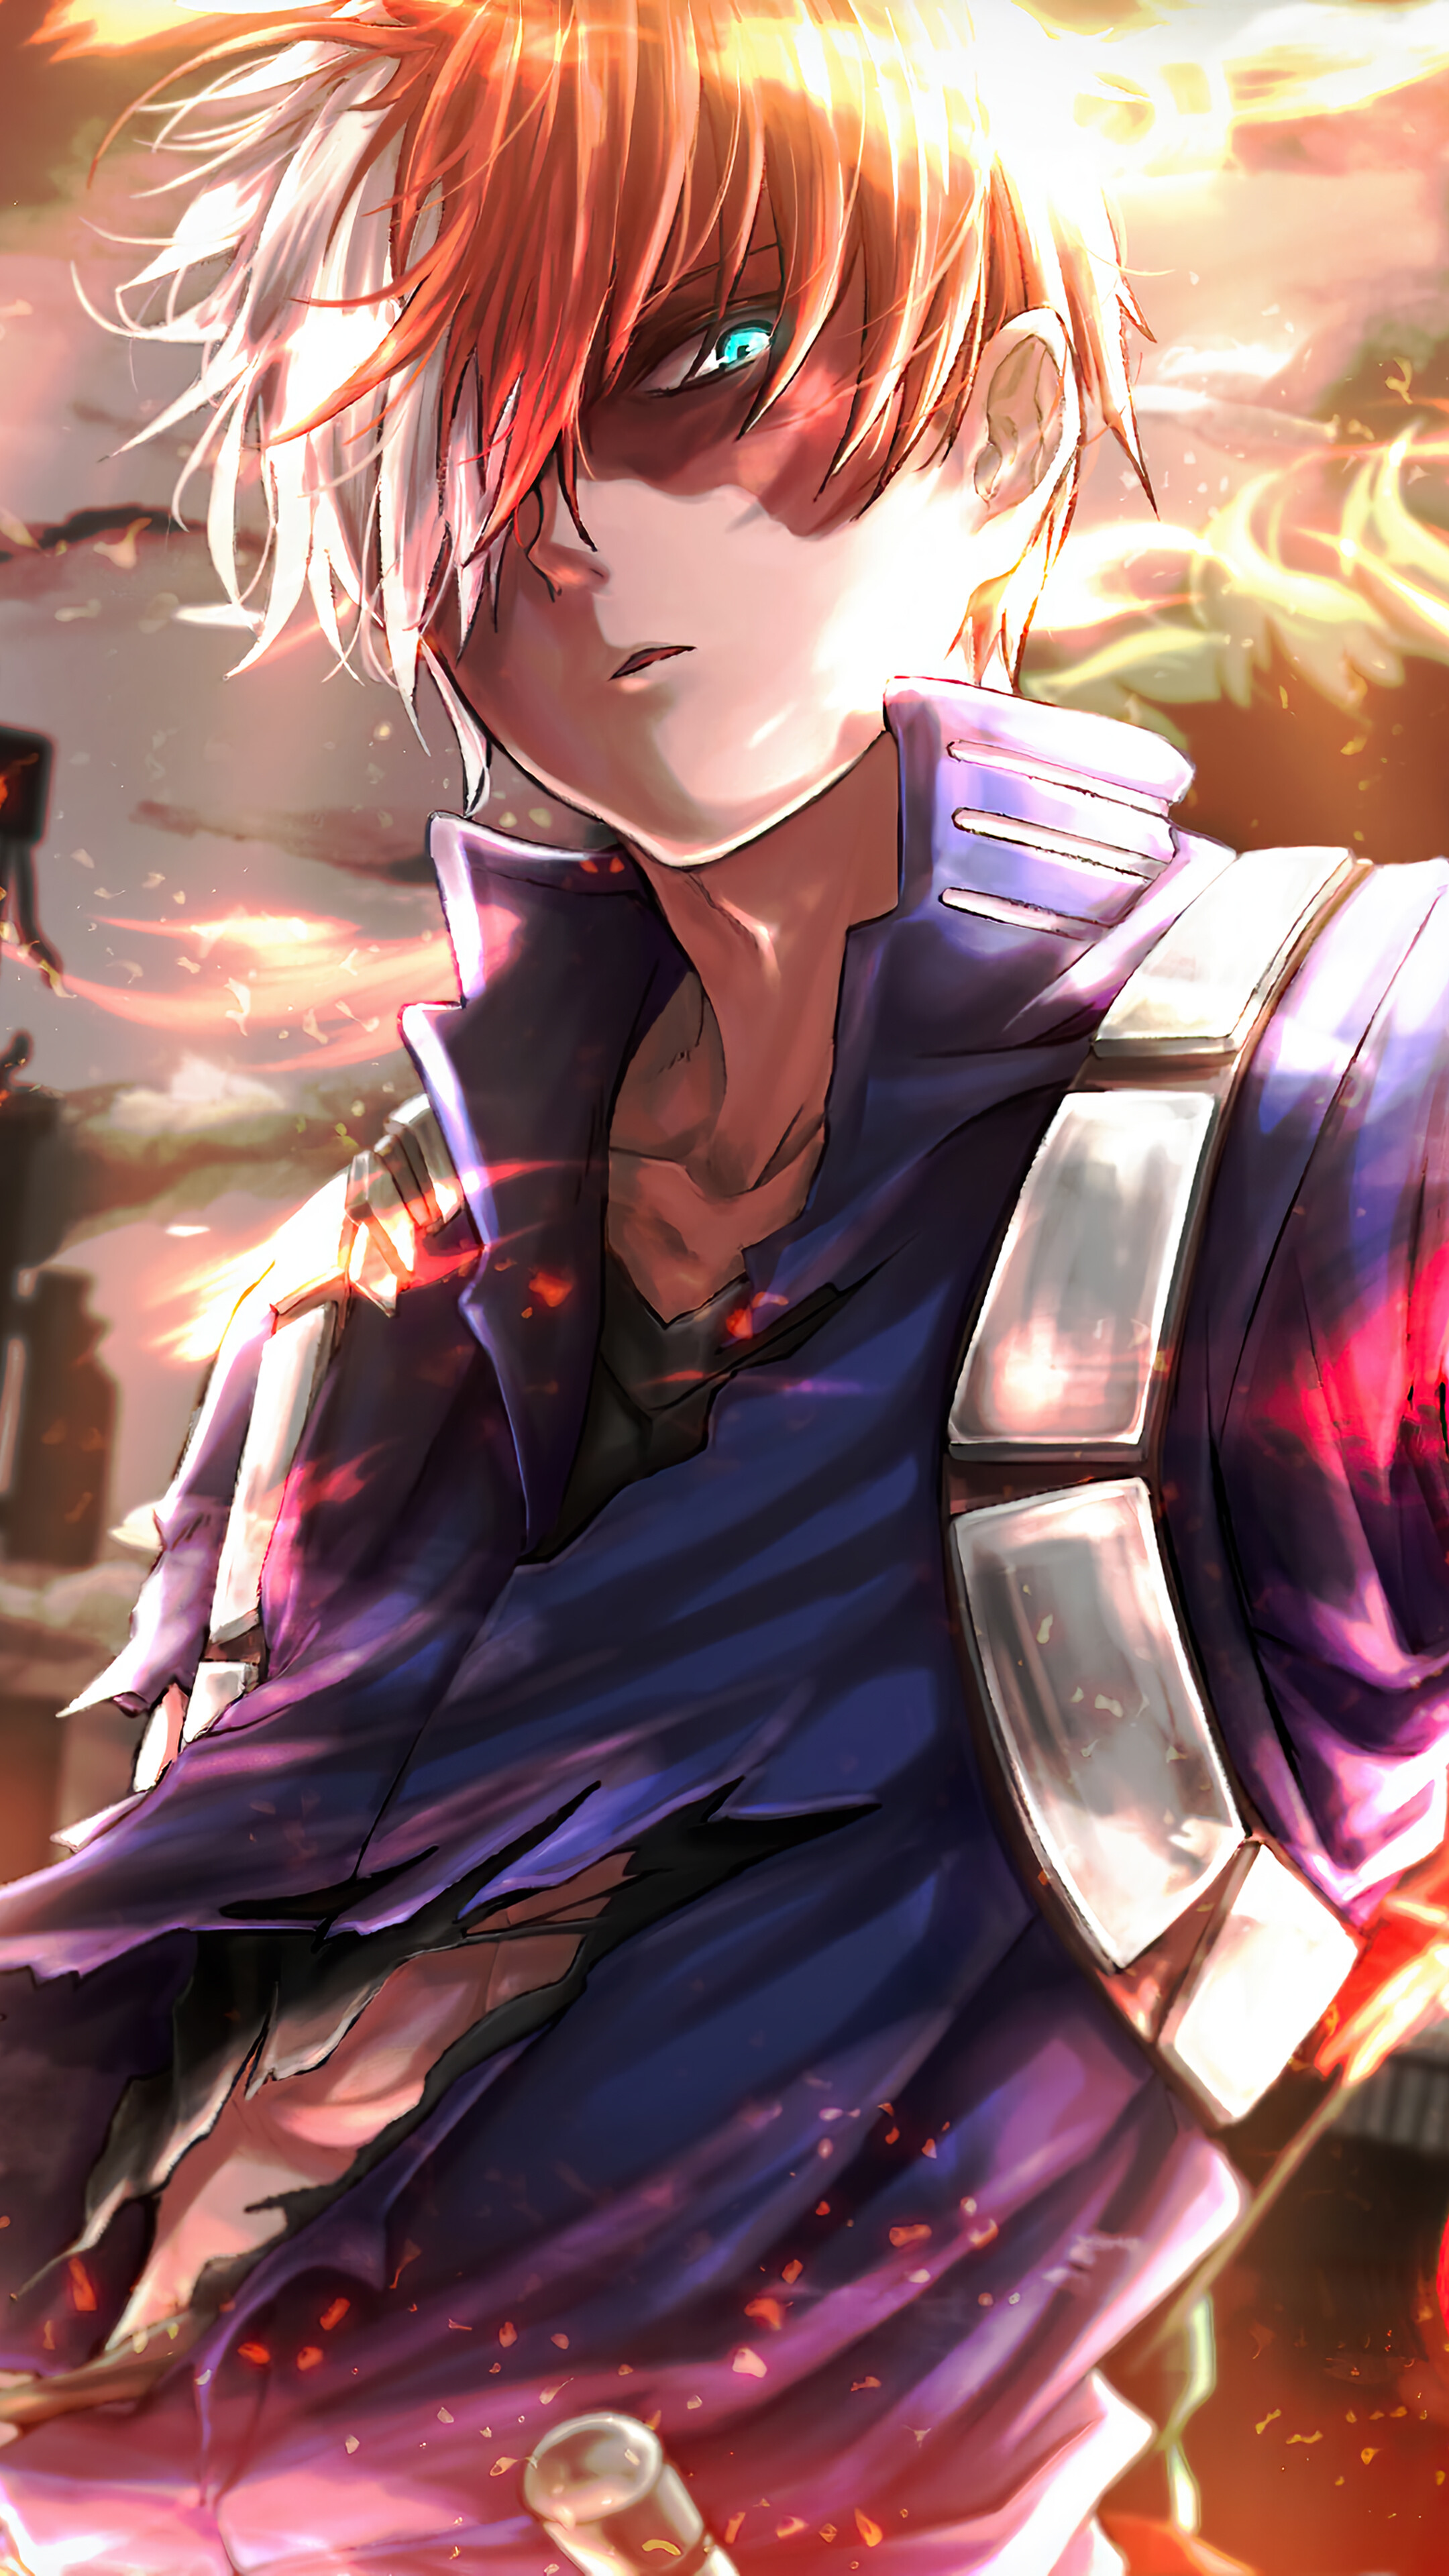 Pictures Of Shoto Todoroki From My Hero Academia Wallpapers